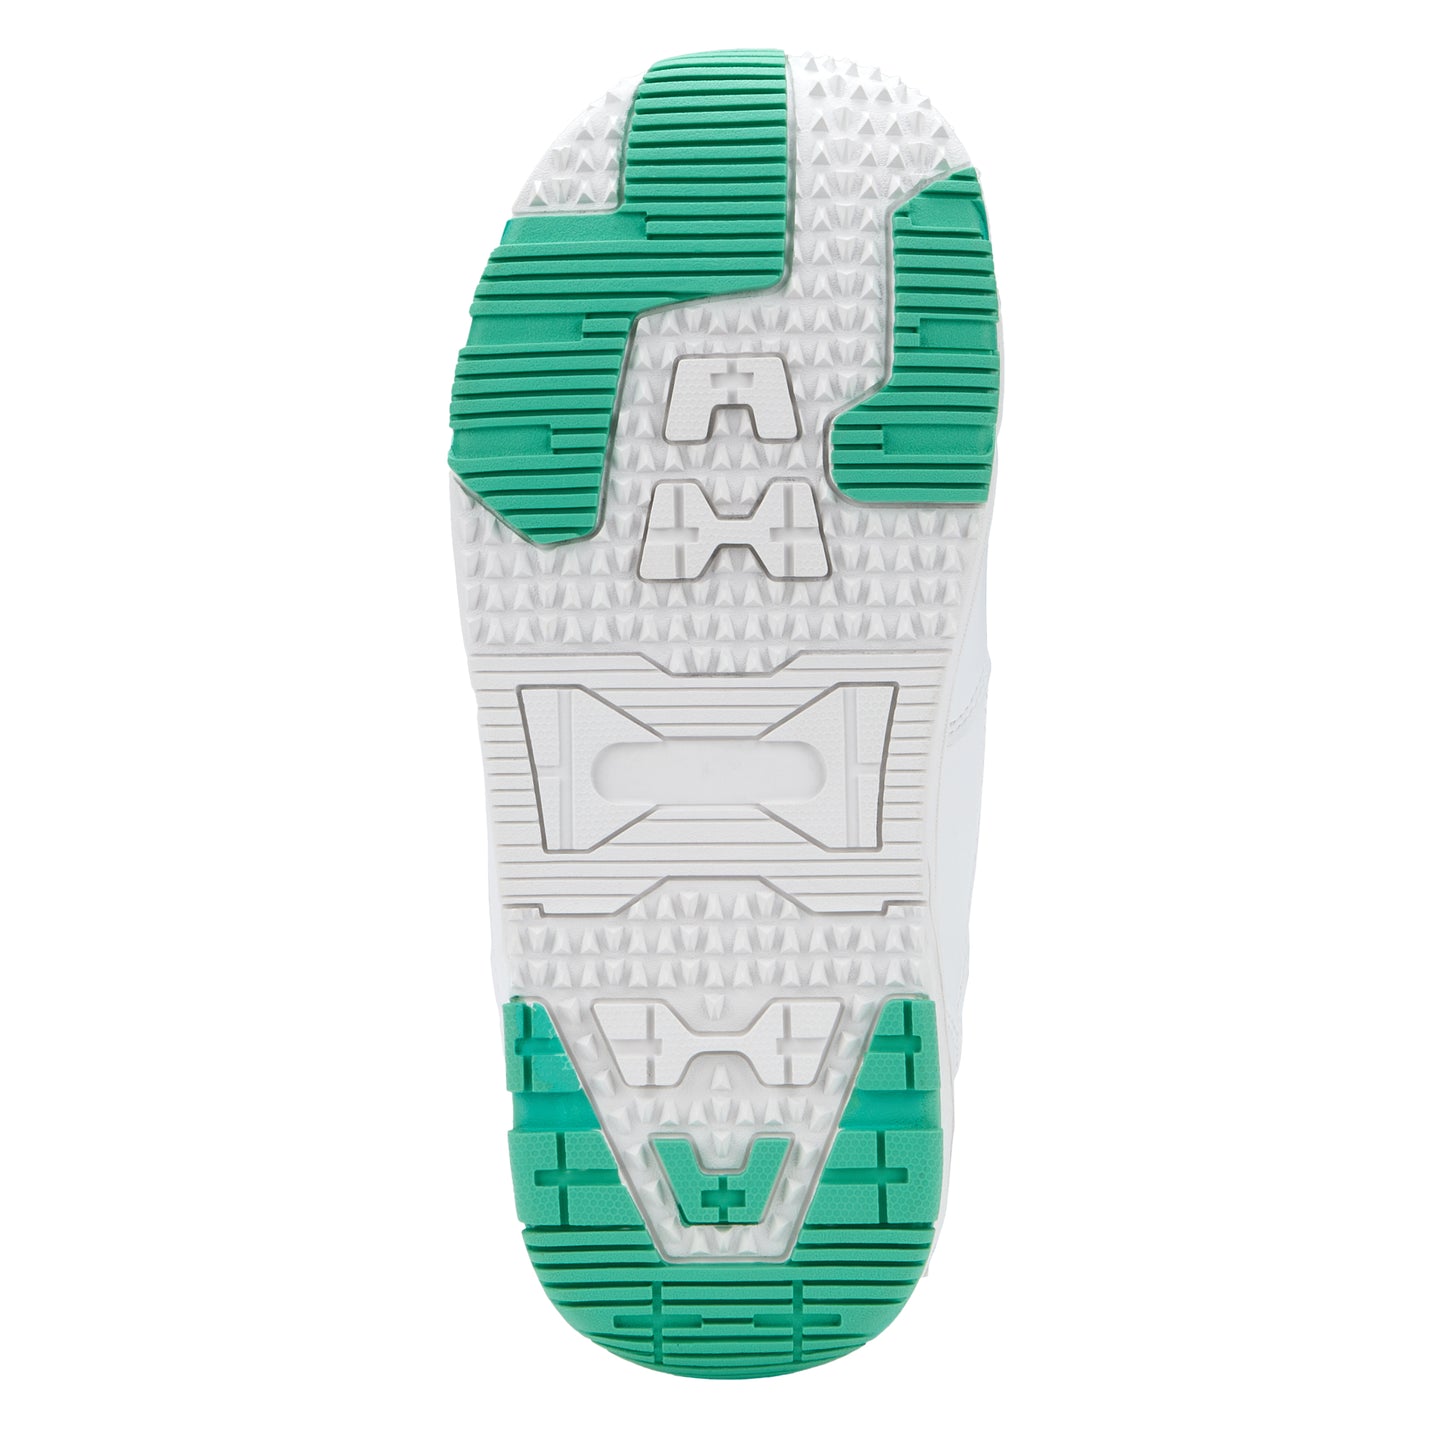 5th Element L-2 ATOP Boots - White/Teal